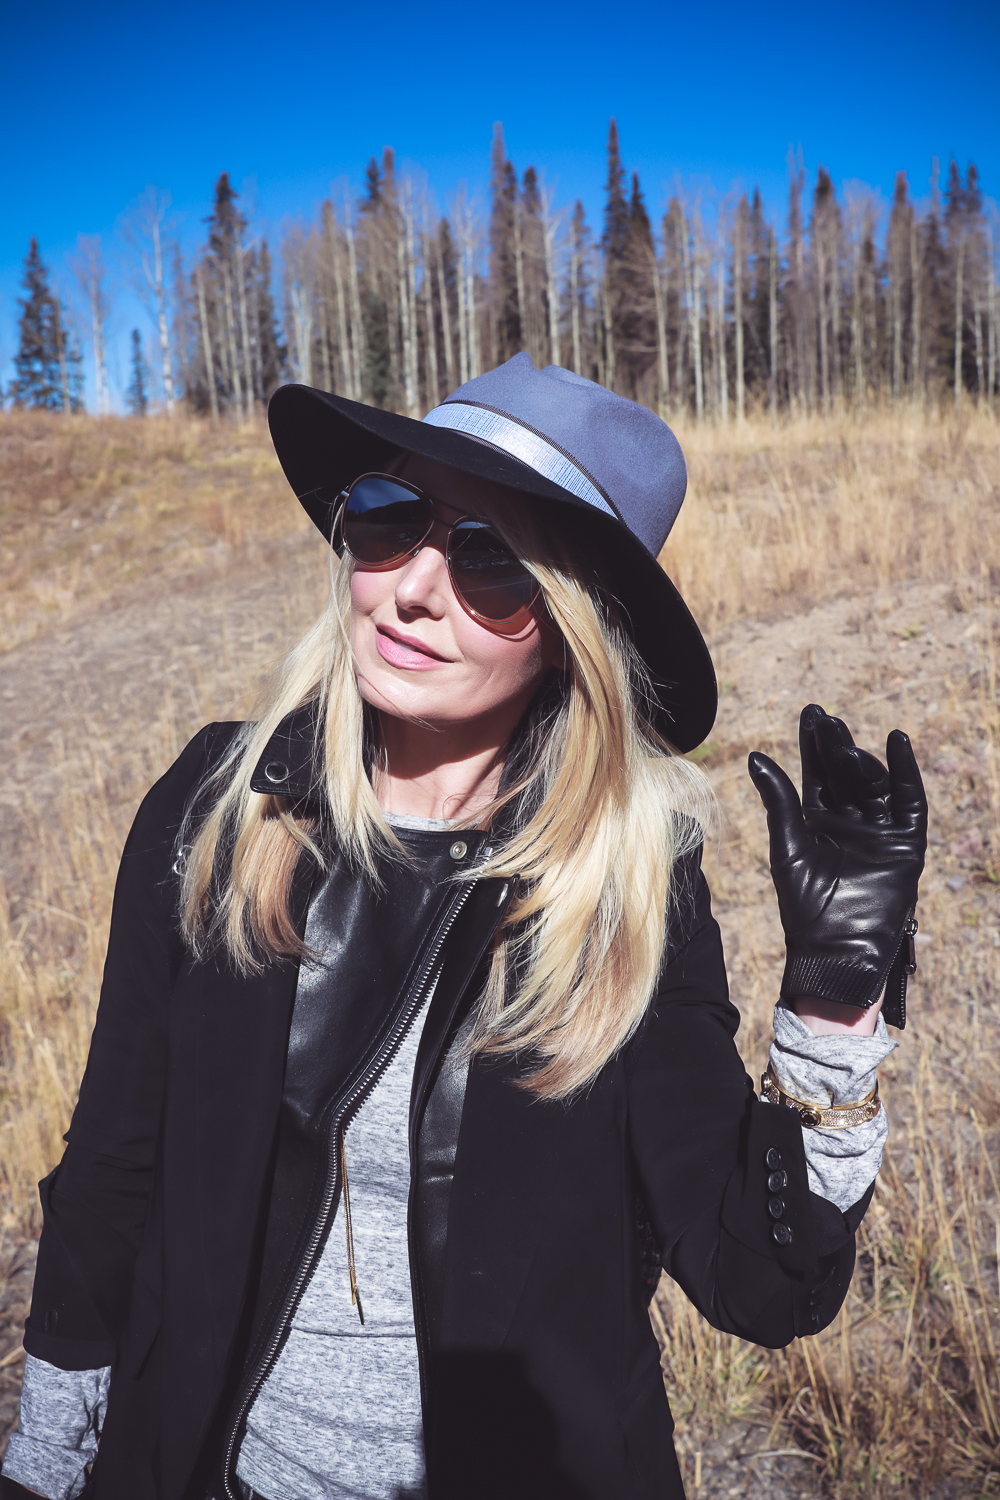 How to style a hat in the fall and winter for women, featuring accessories from Henri Bendel like this felt hat, aviator sunglasses, adjustible lariat necklace and black leather gloves, along with a gold bangle bracelet